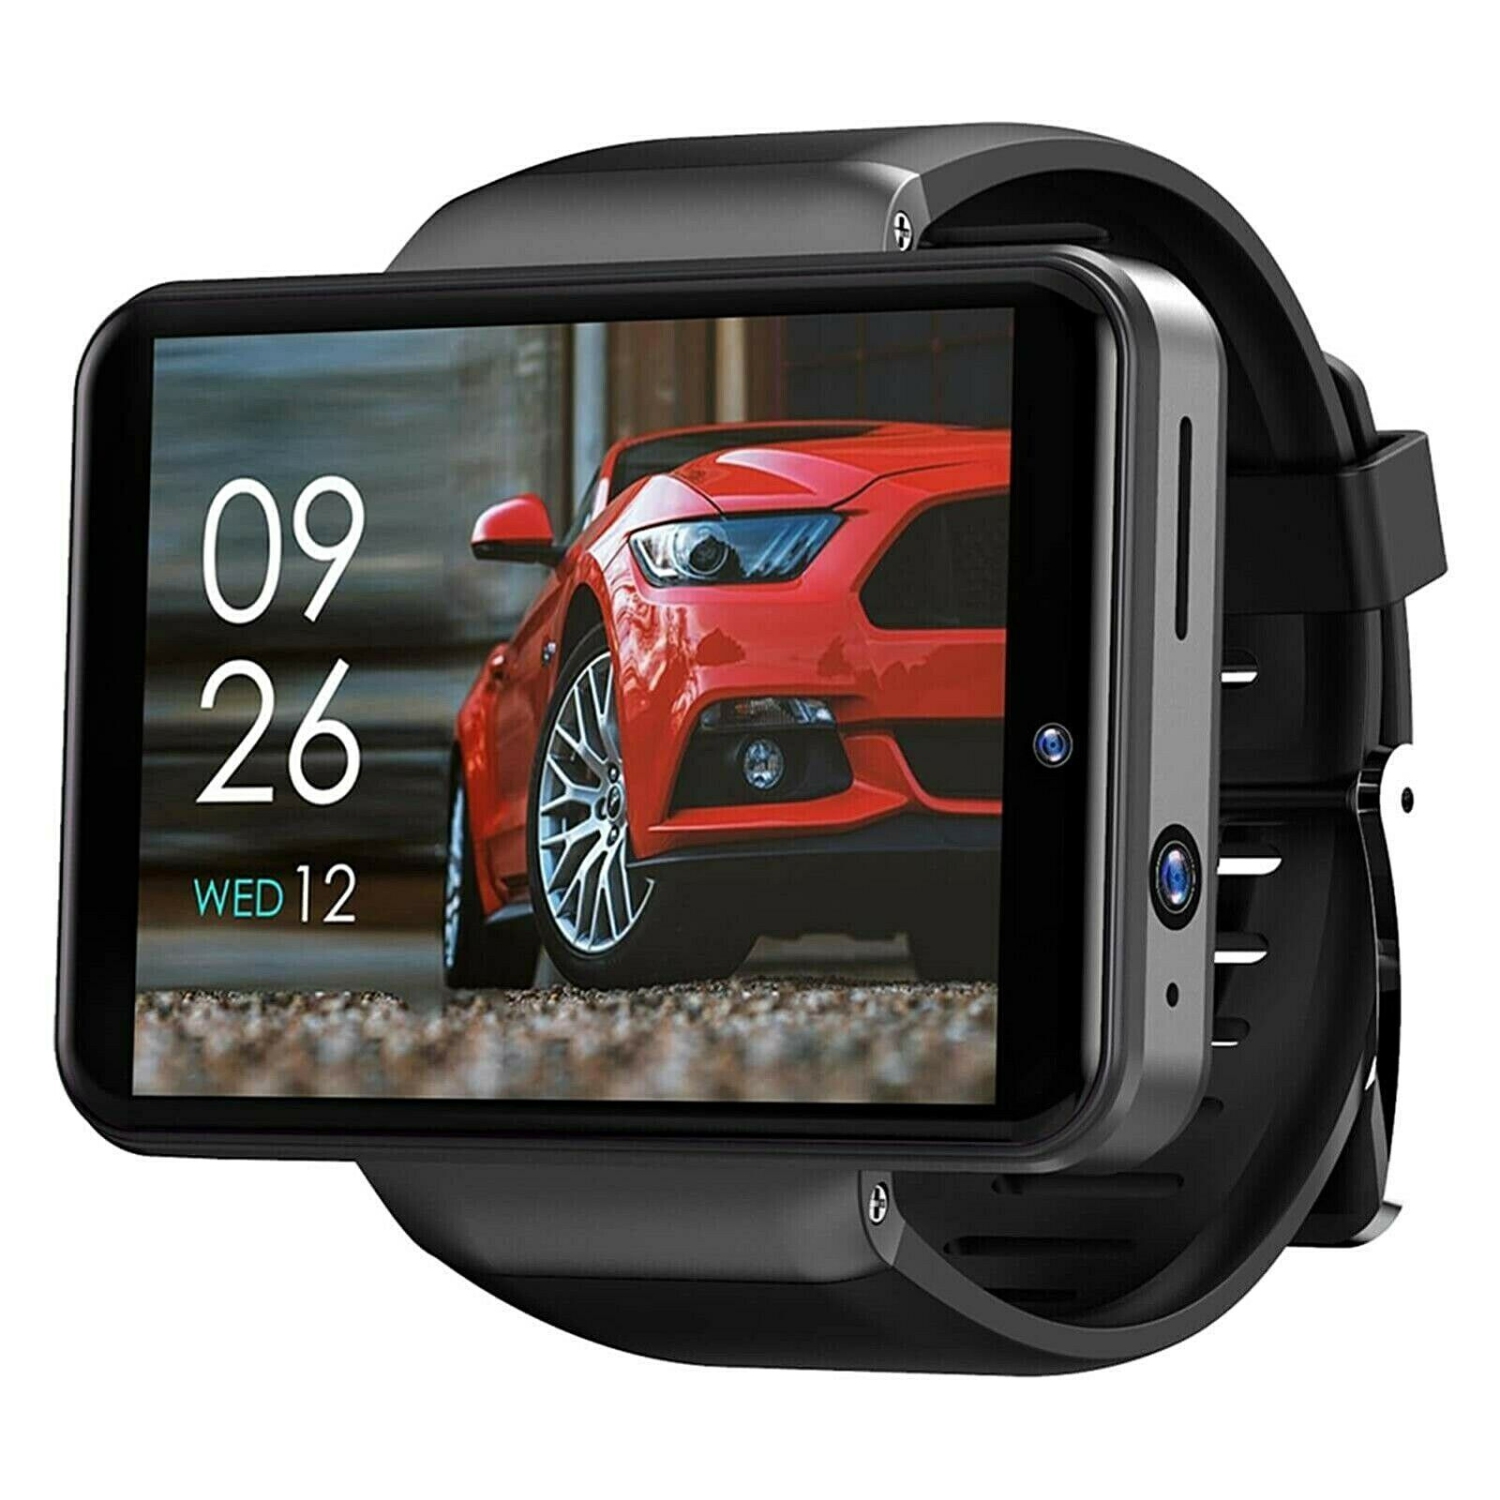 ISPEKTRUM IS101 4G Android Smartwatch Phone, 2.4 inch Screen, 5MP+2MP Camera, 3GB+32GB, 2080 mAh Battery, IP67 Waterproof, 4G LTE Call, GPS, WiFi, Sports Mode, Fitness Tracker Heart Rate Monitor